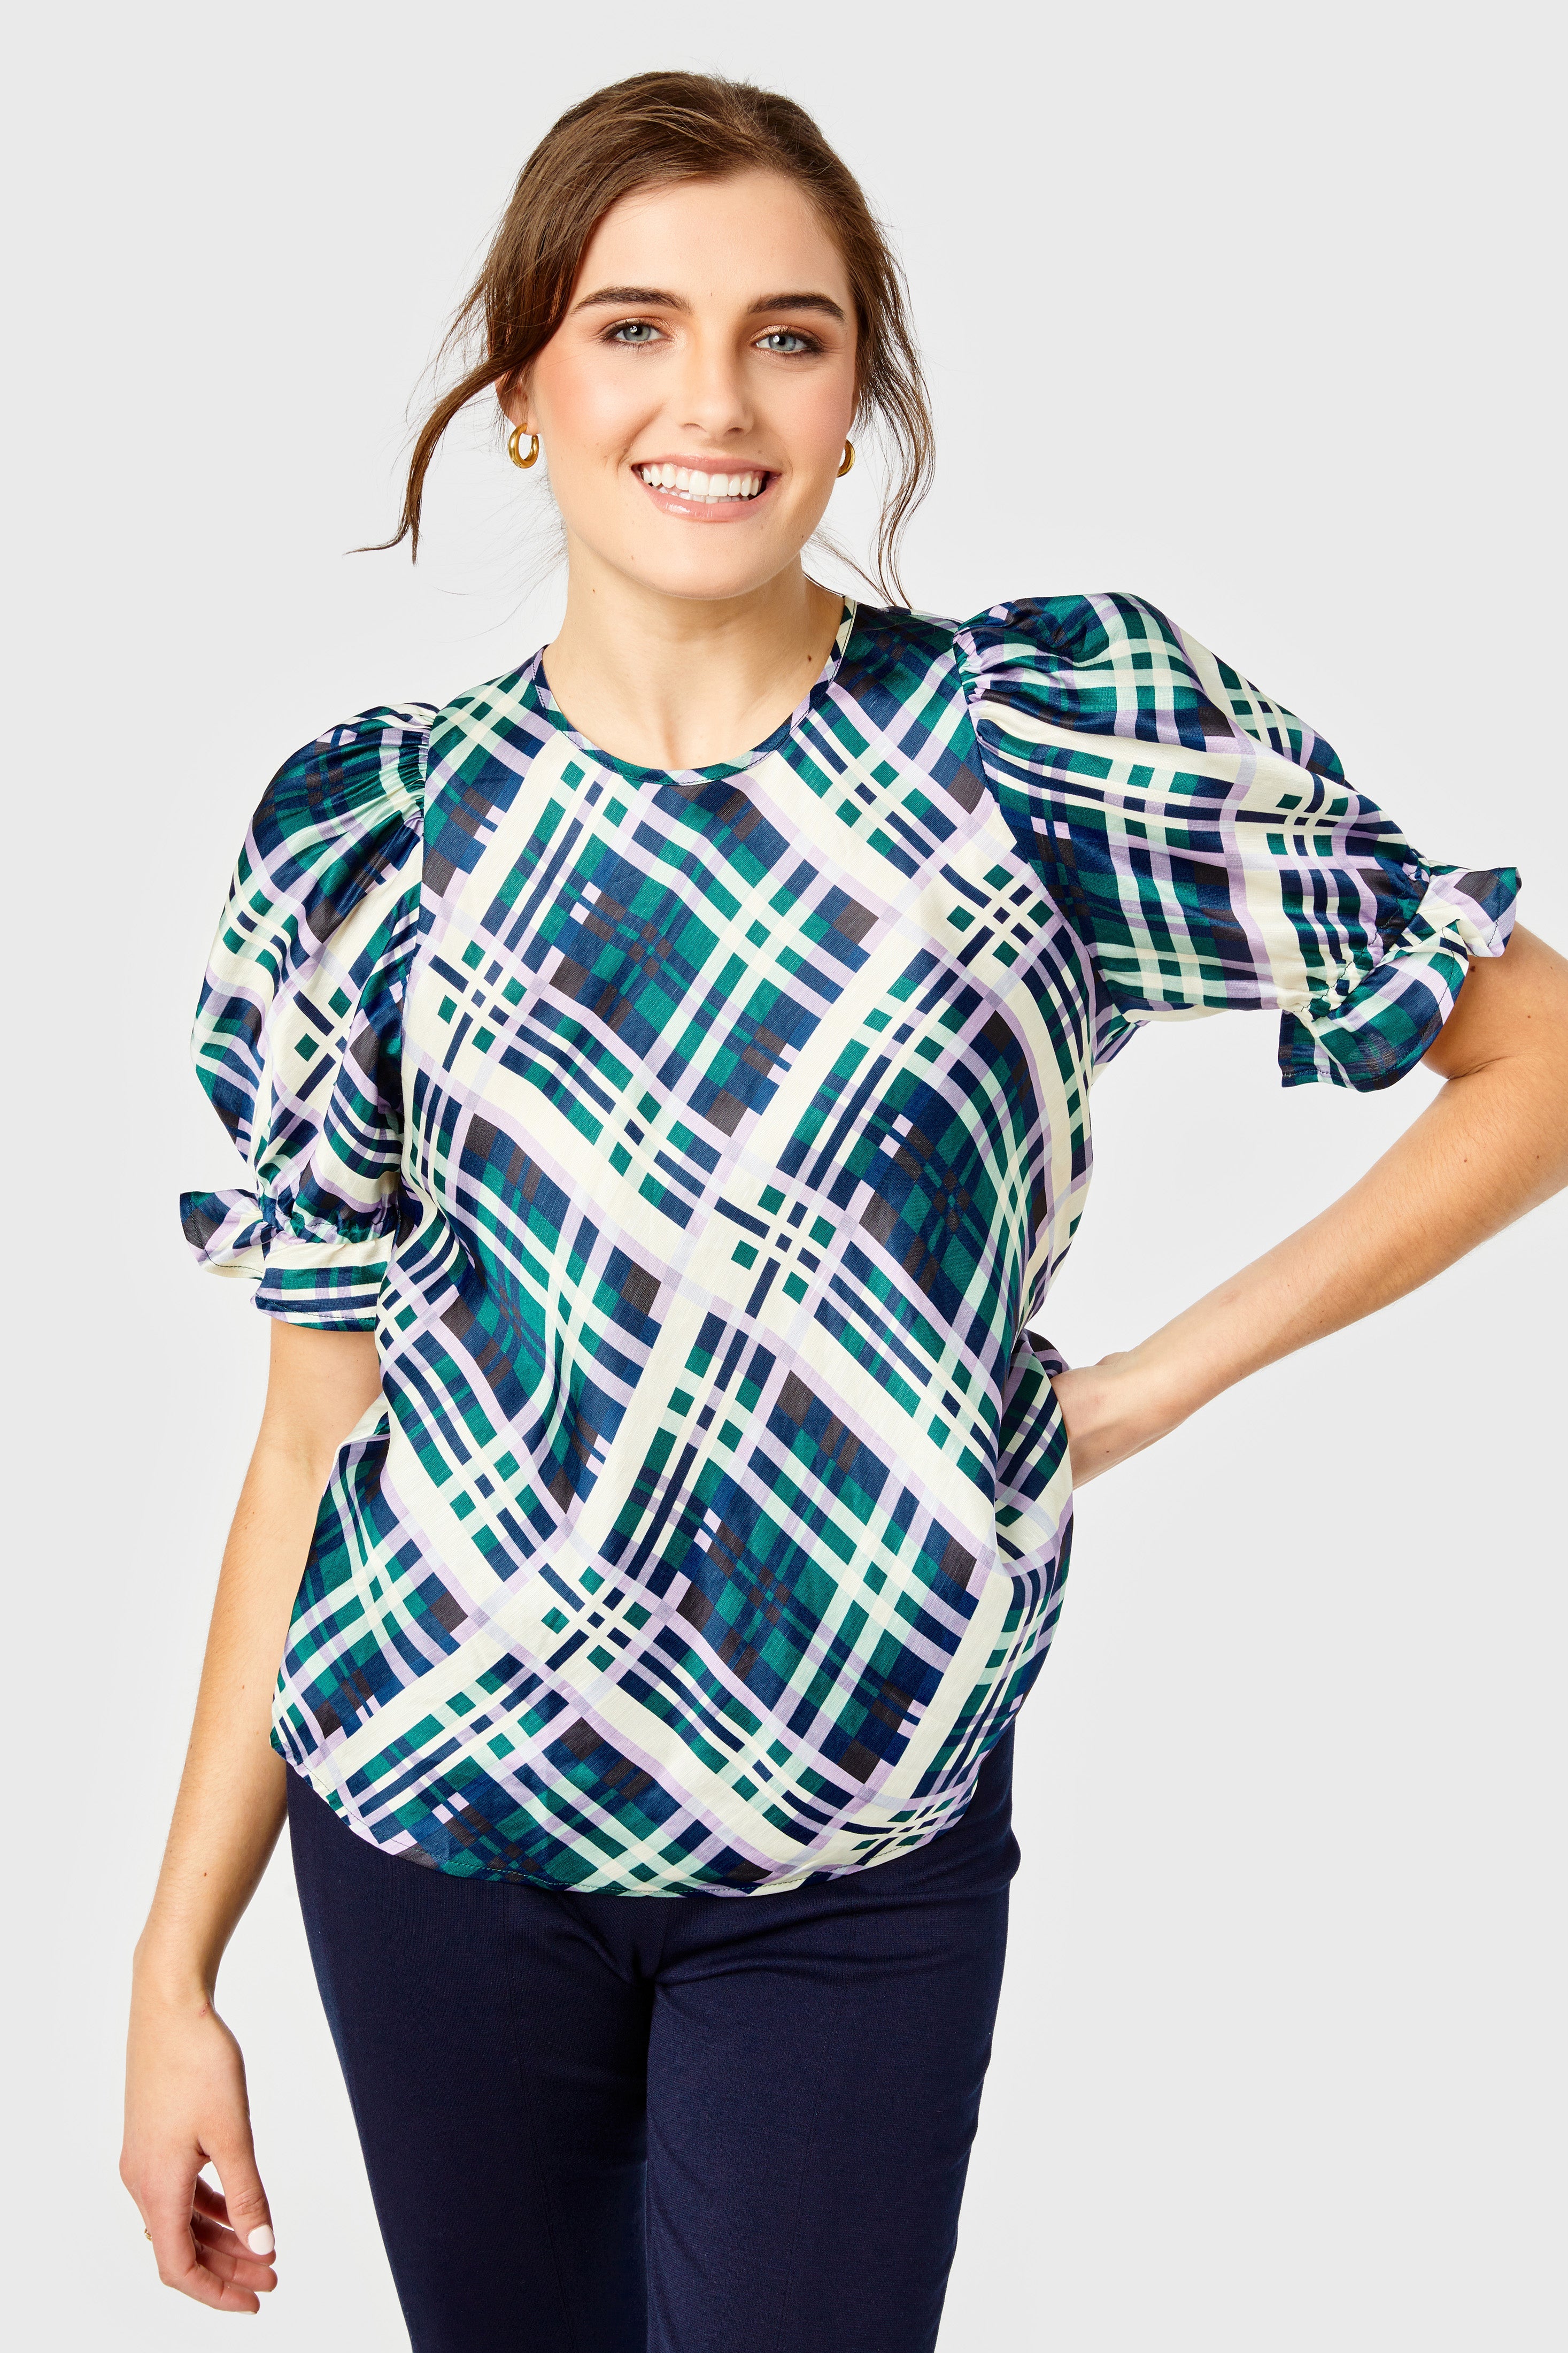 Connie Anne Top-Rayon Linen-Evergreen Plaid by Cartolina